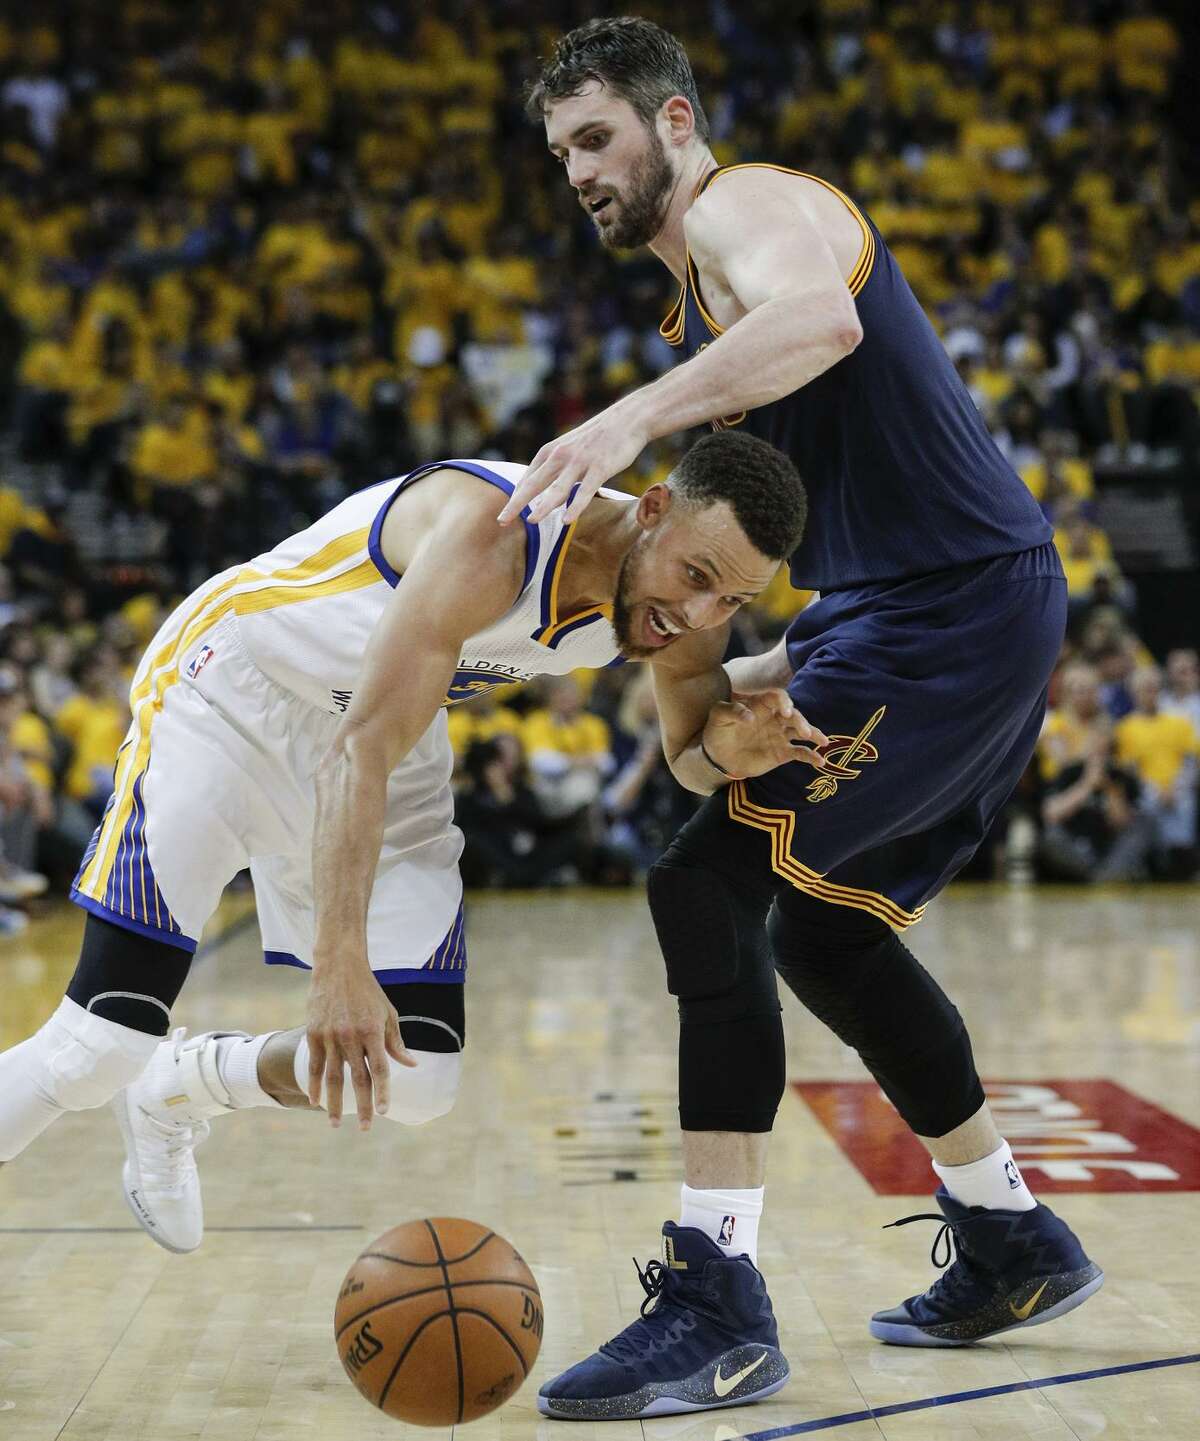 Golden State Warriors' Stephen Curry gets past Cleveland Cavaliers' Kevin Love in the fourth quarter during Game 1 of the 2017 NBA Finals at Oracle Arena on Thursday, June 1, 2017 in Oakland, Calif.